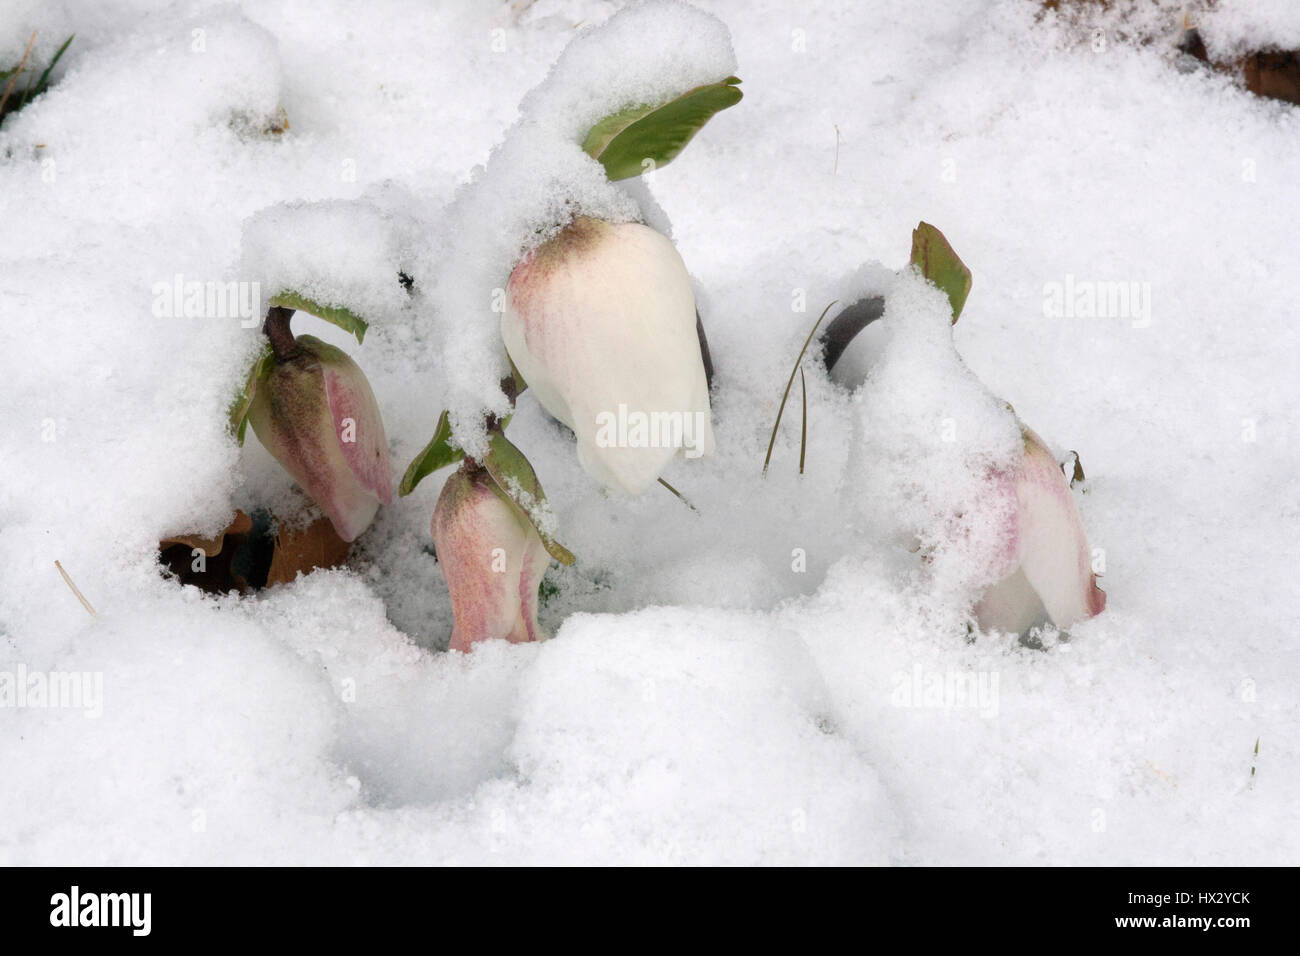 Helleborus niger buds covered in snow Stock Photo